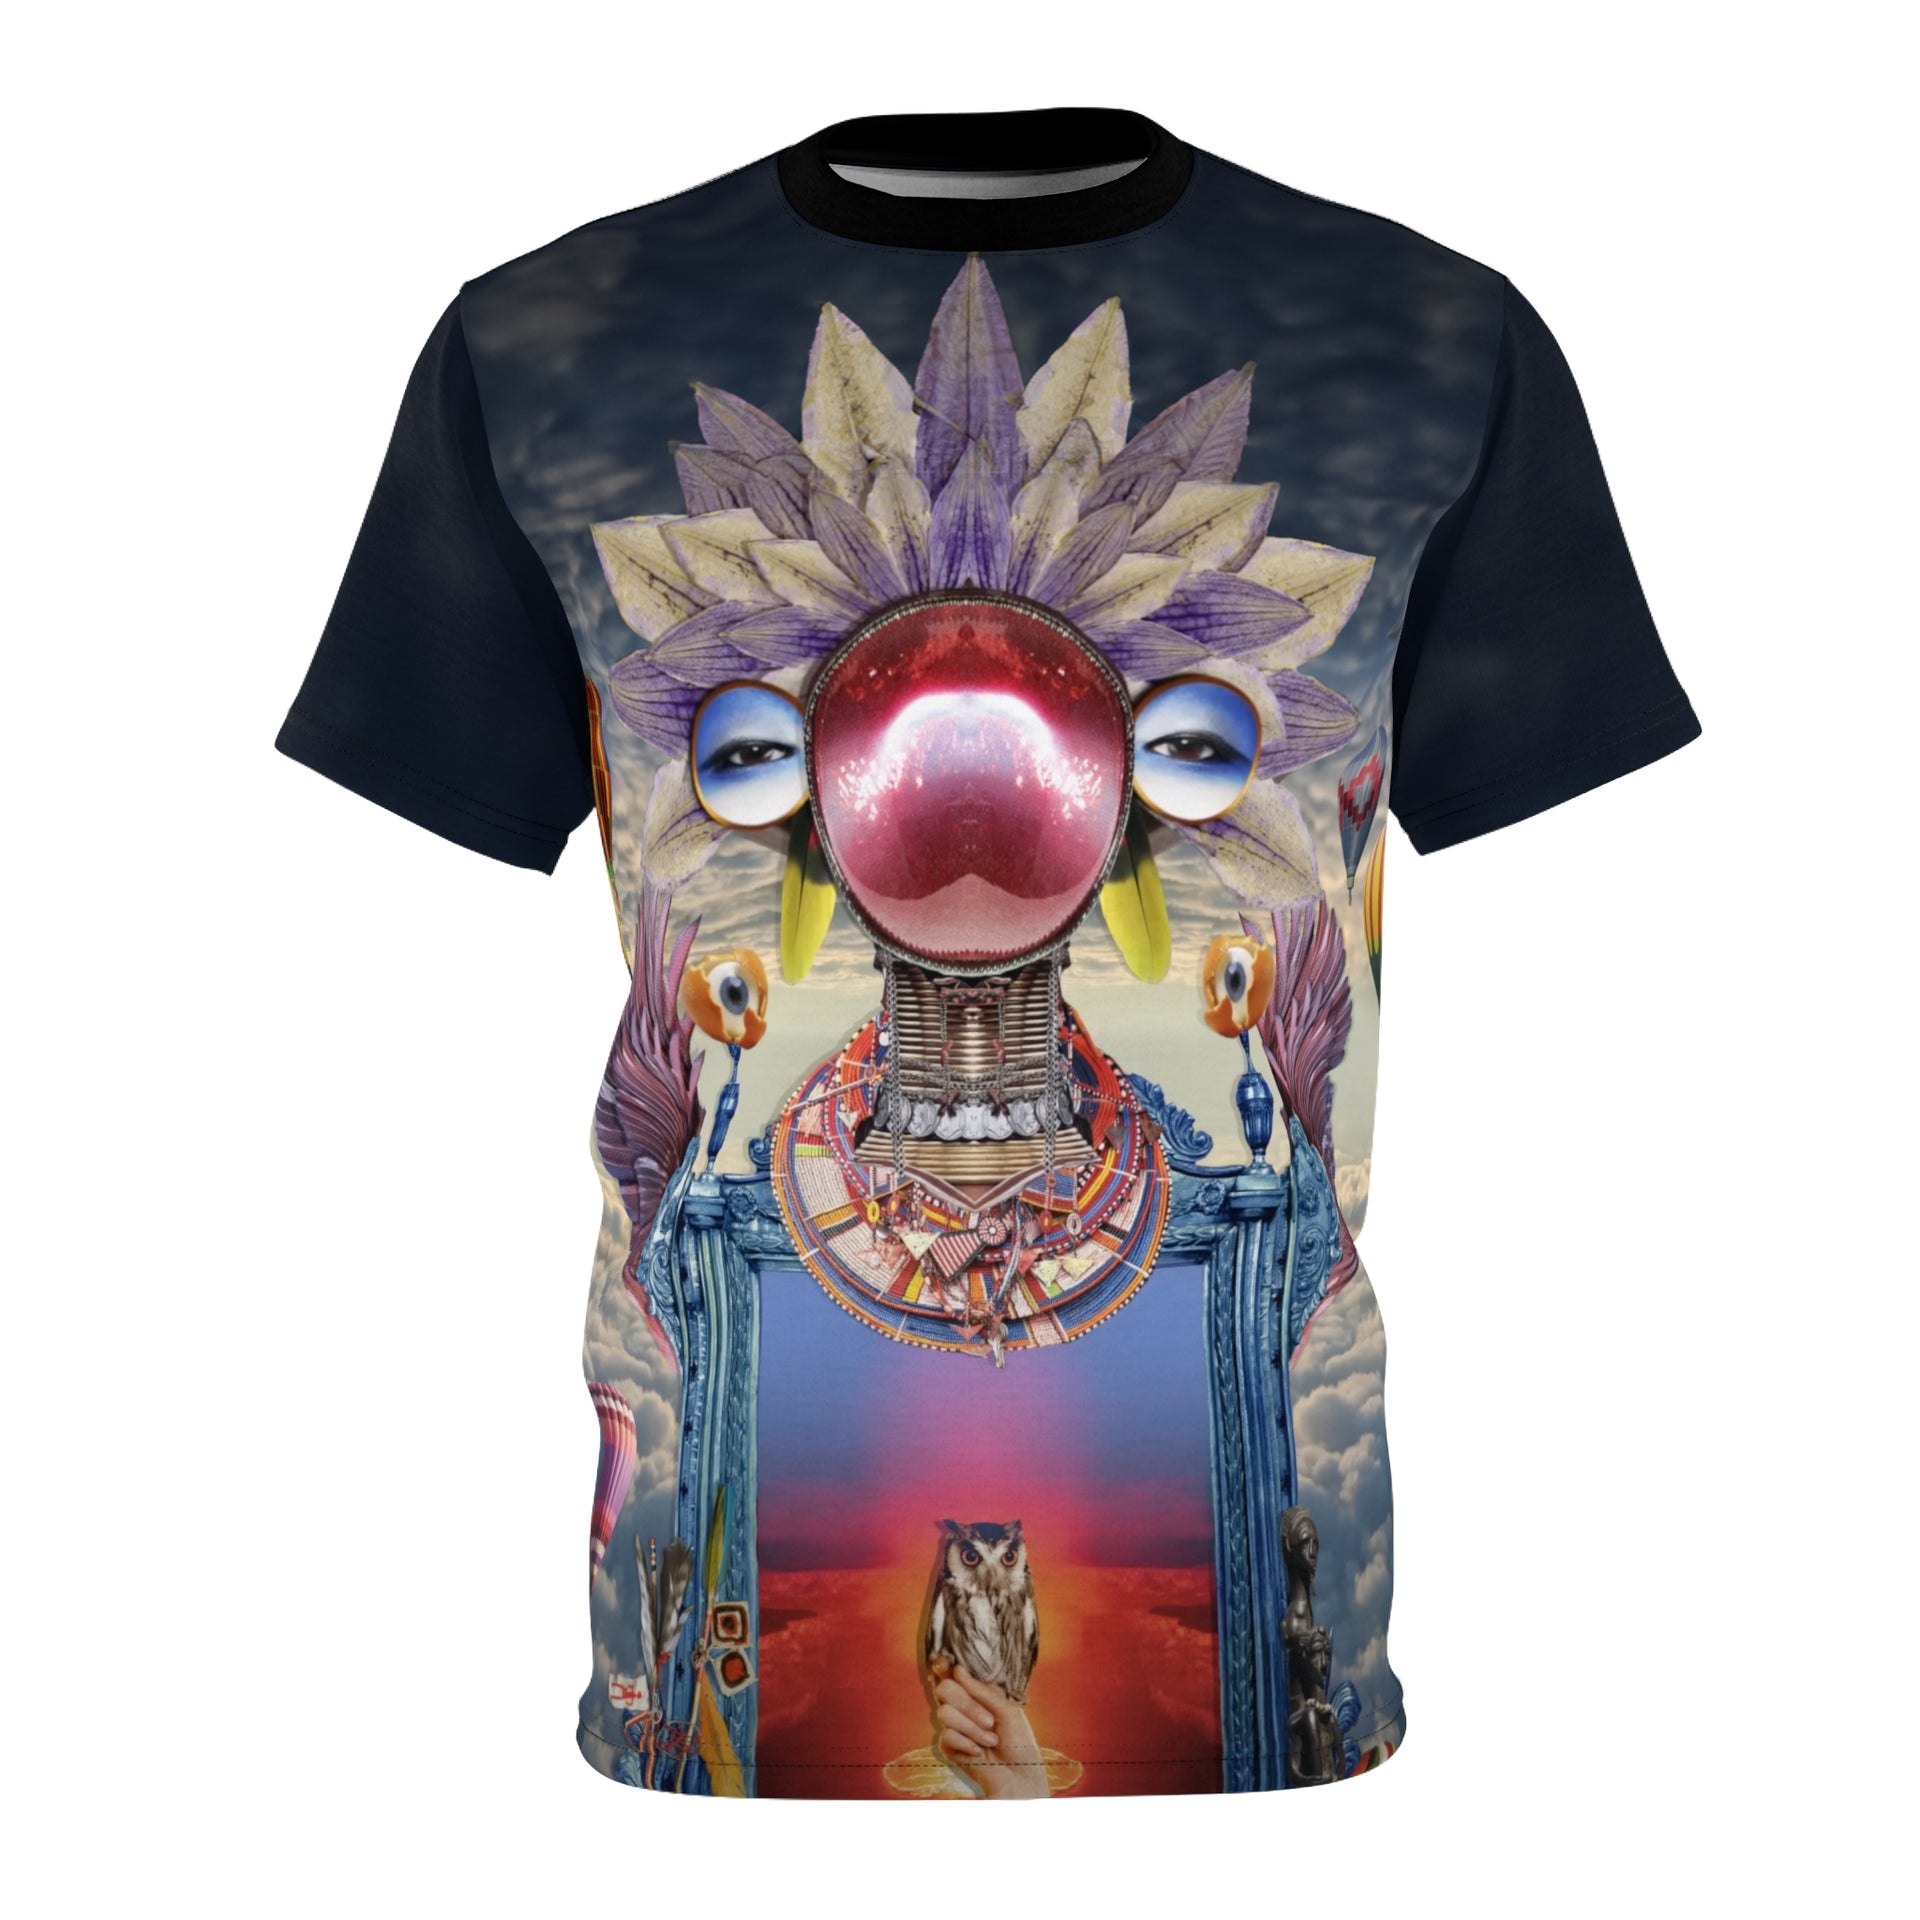 Bassnectar - Other Worlds [B] - All over print tee